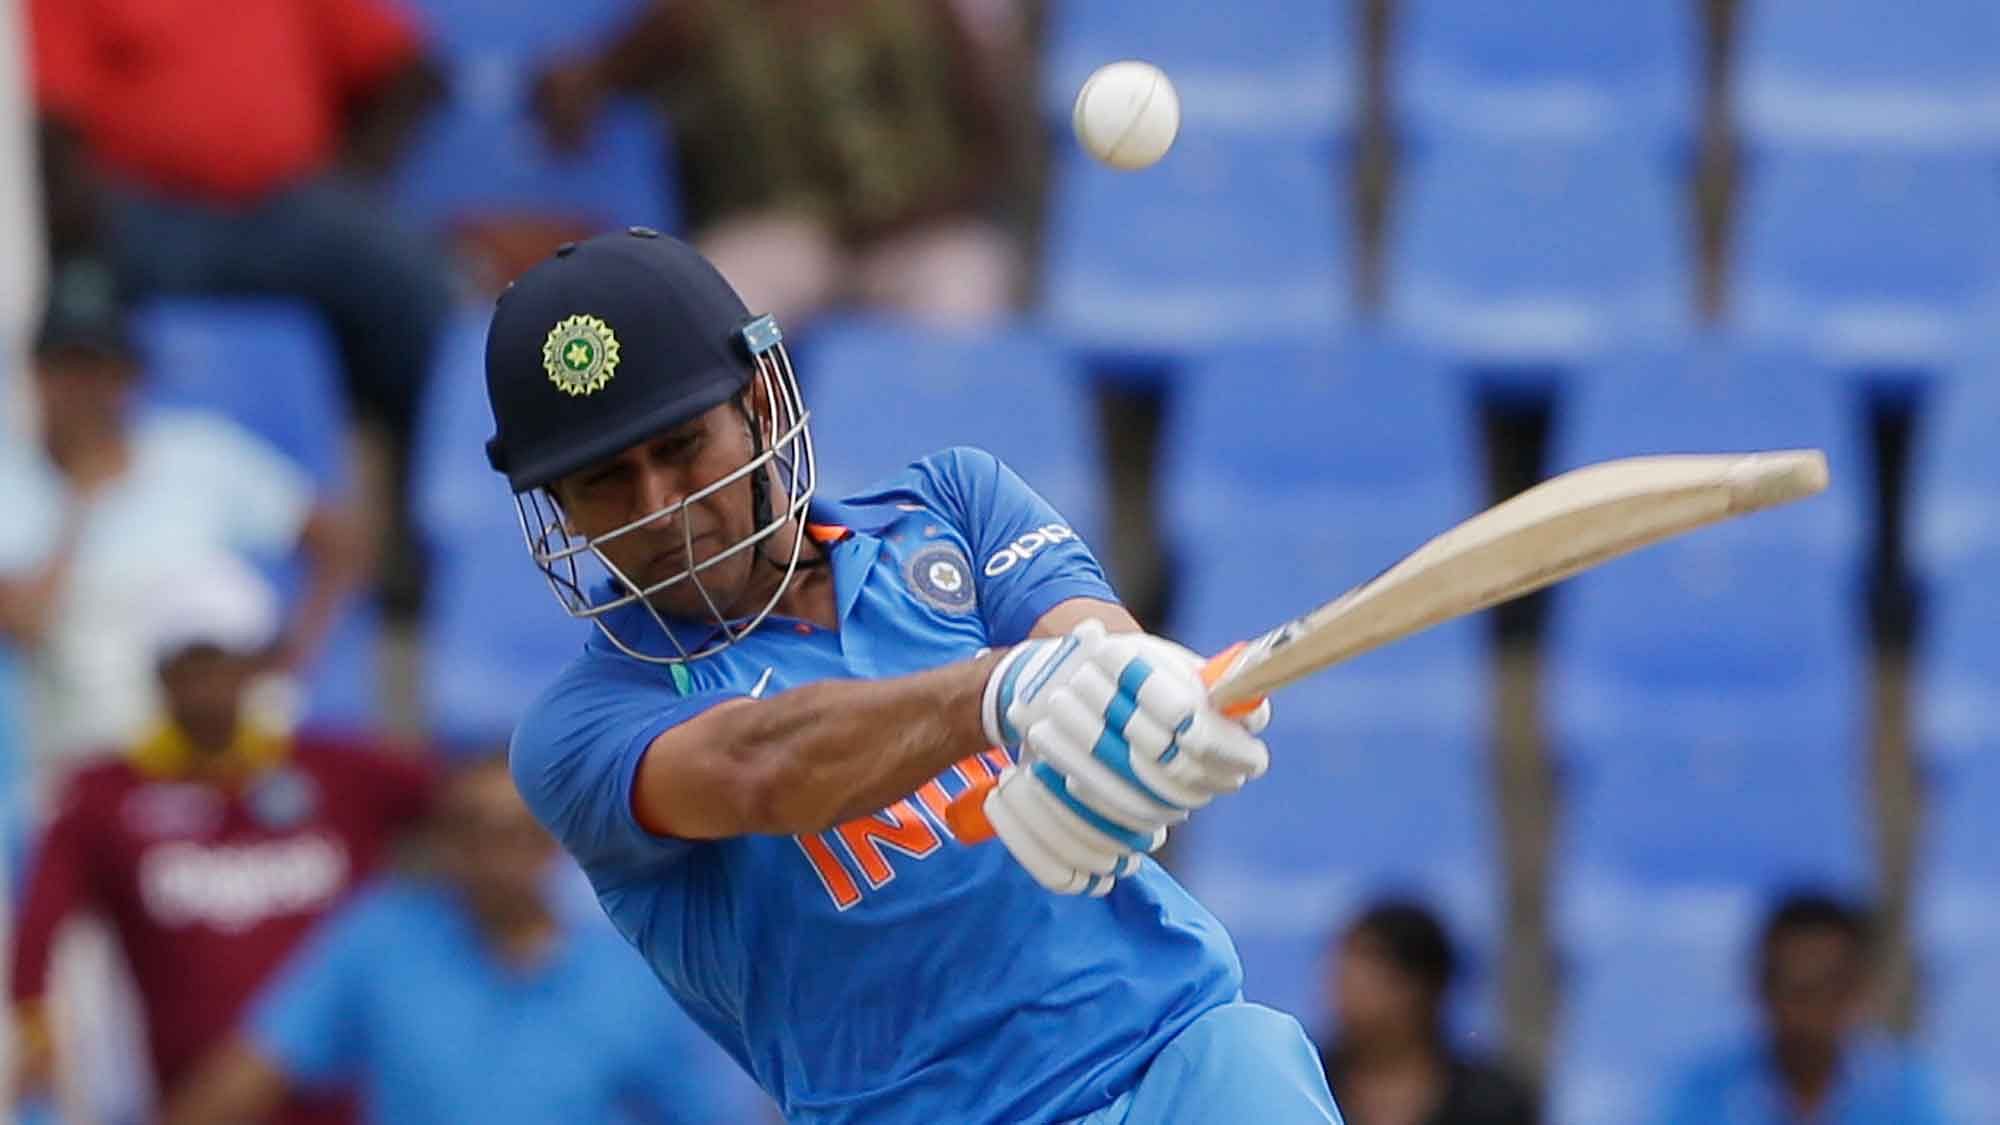 MS Dhoni was named Man of the Match for his unbeaten 78-run knock.